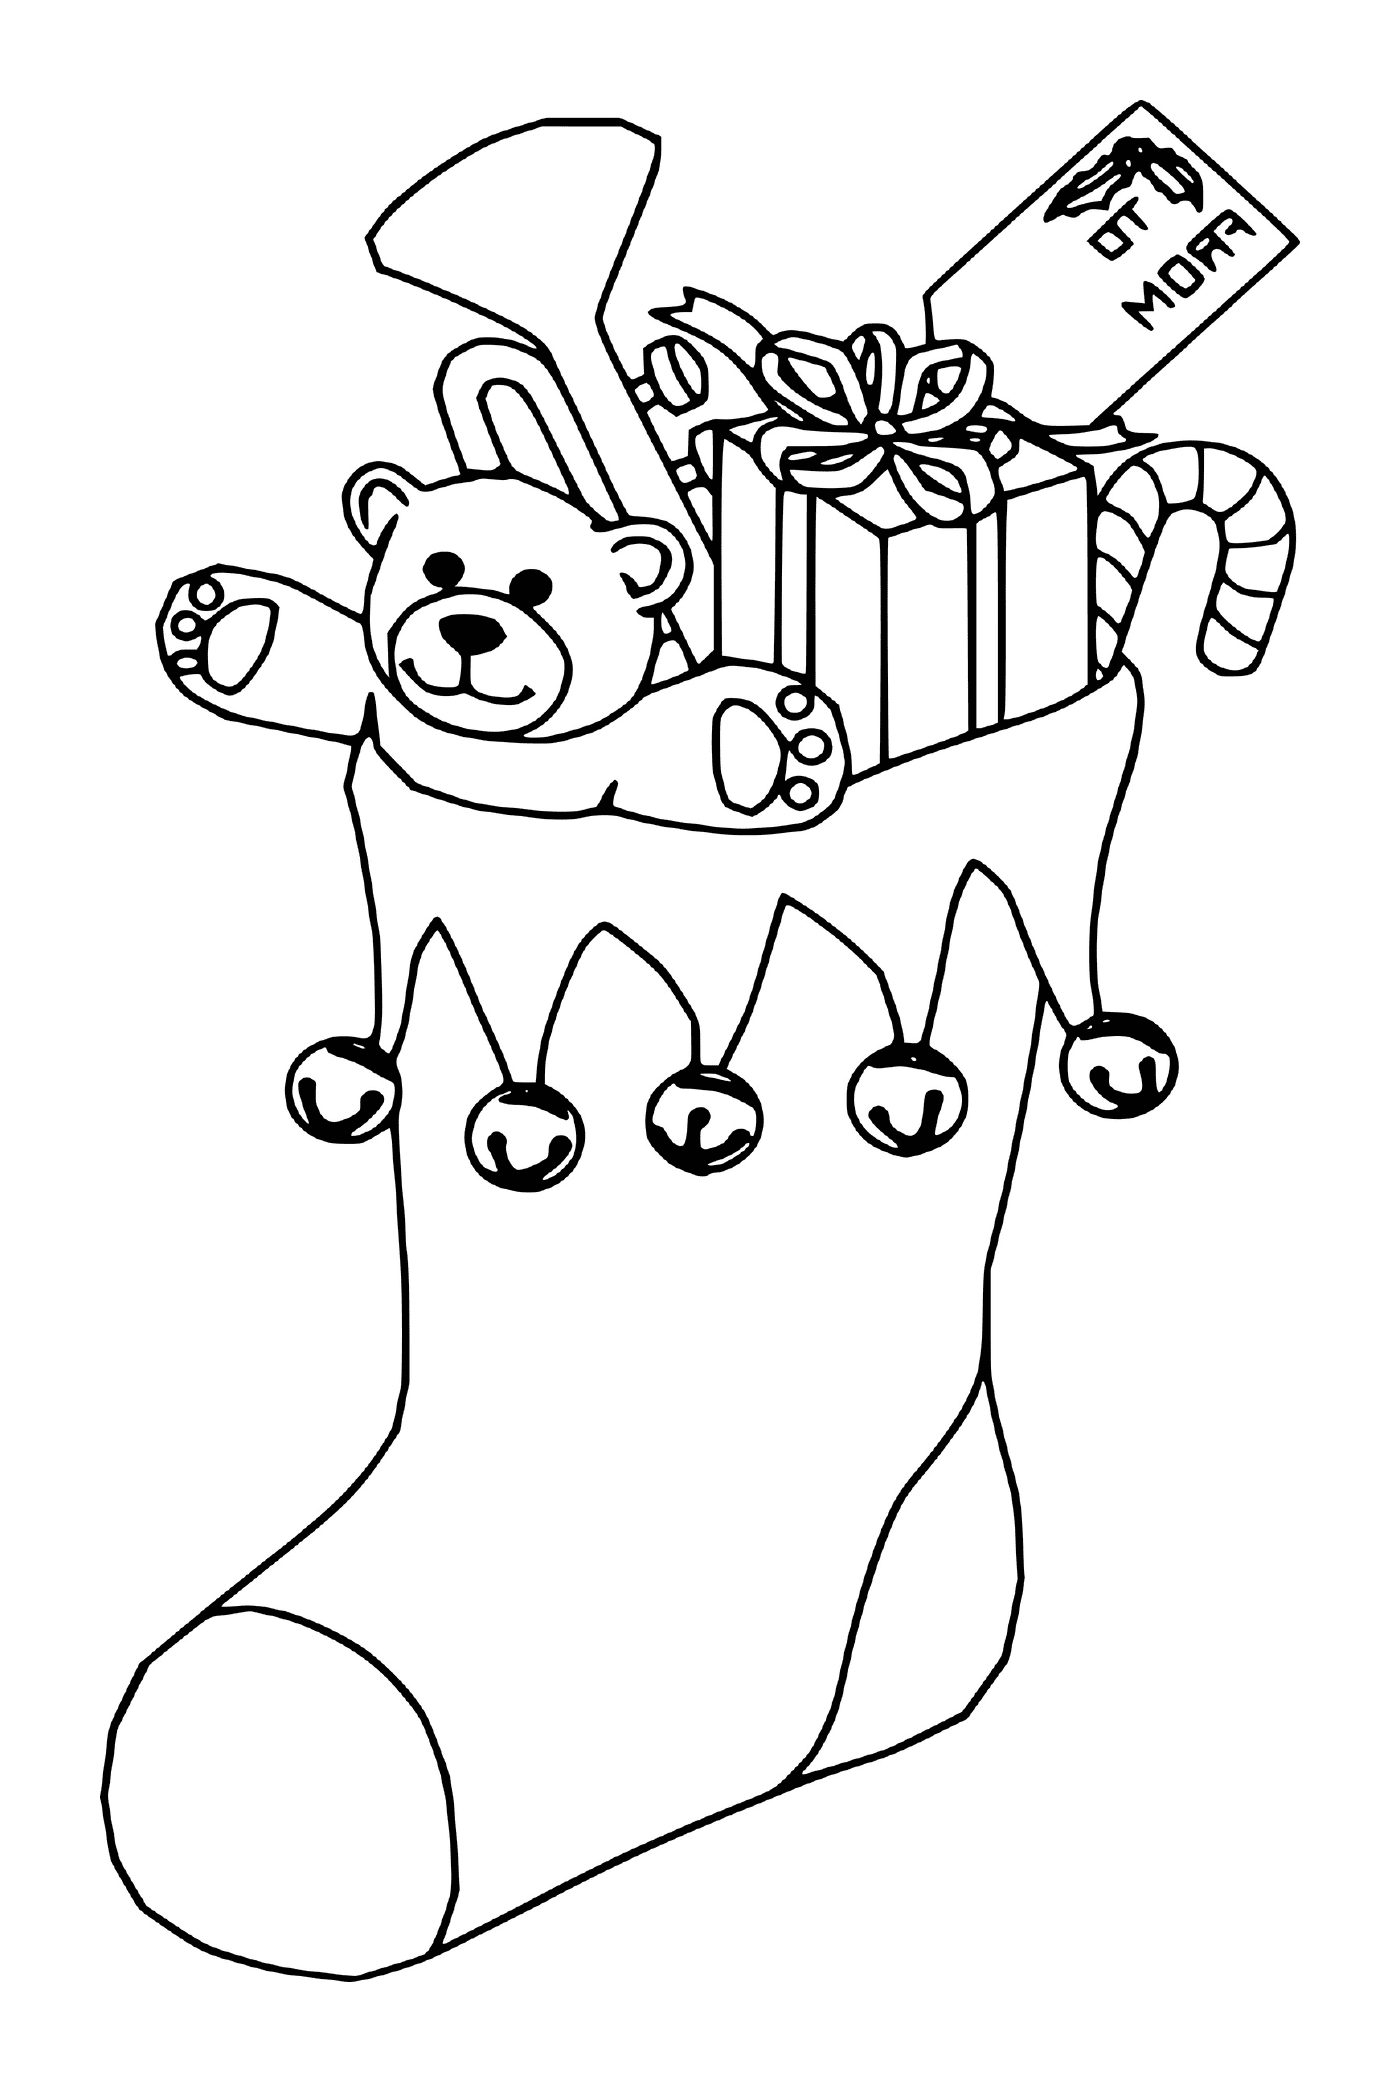  A teddy bear playing trumpet in a Christmas stockings 